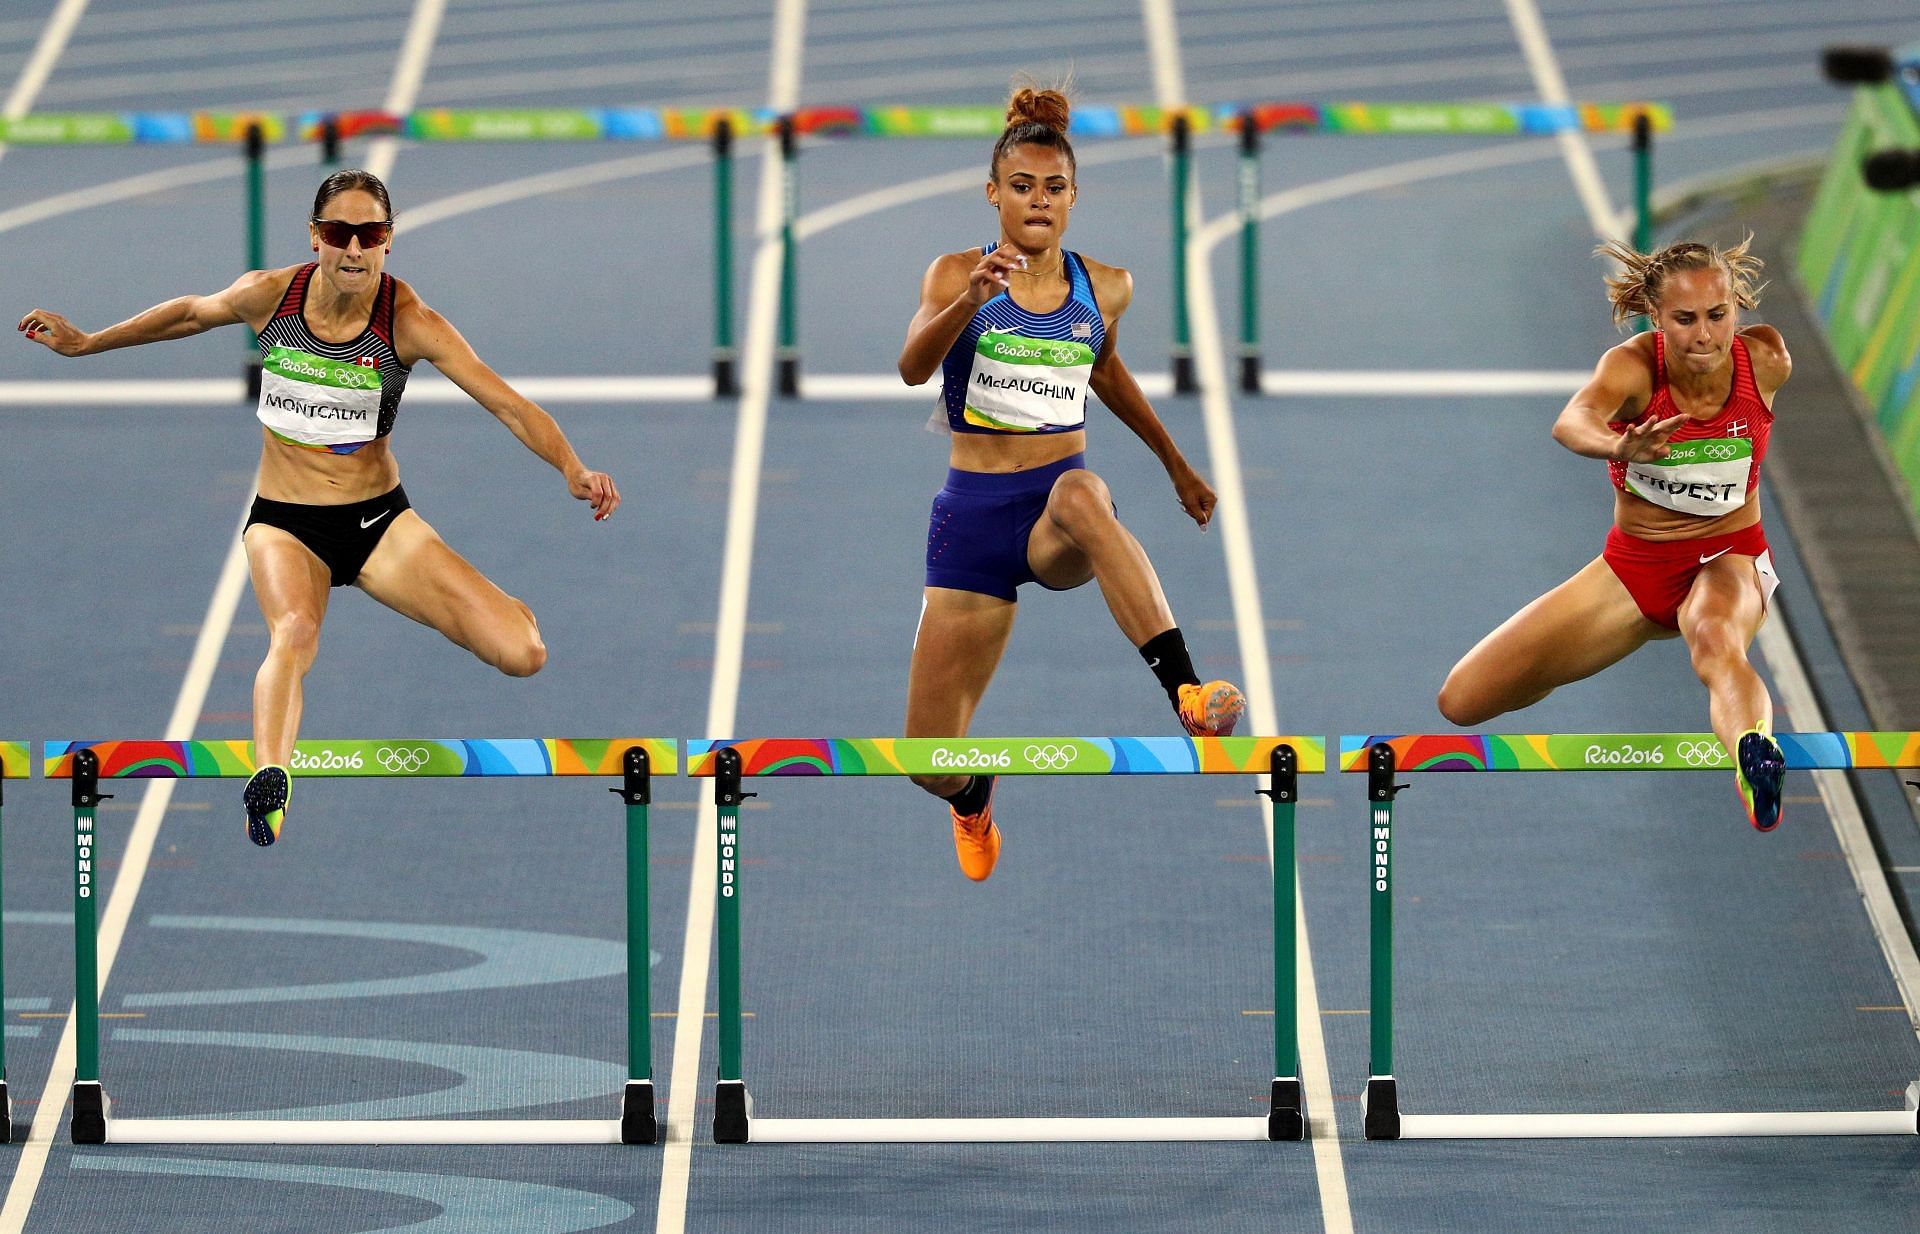 Sydney McLaughlin of the United States and Stina Troest of Denmark compete during the Women&#039;s 400m Hurdles Semifinals on Day 11 of the Rio 2016 Olympic Games at the Olympic Stadium on August 16, 2016 in Rio de Janeiro, Brazil. (Photo by Paul Gilham/Getty Images)